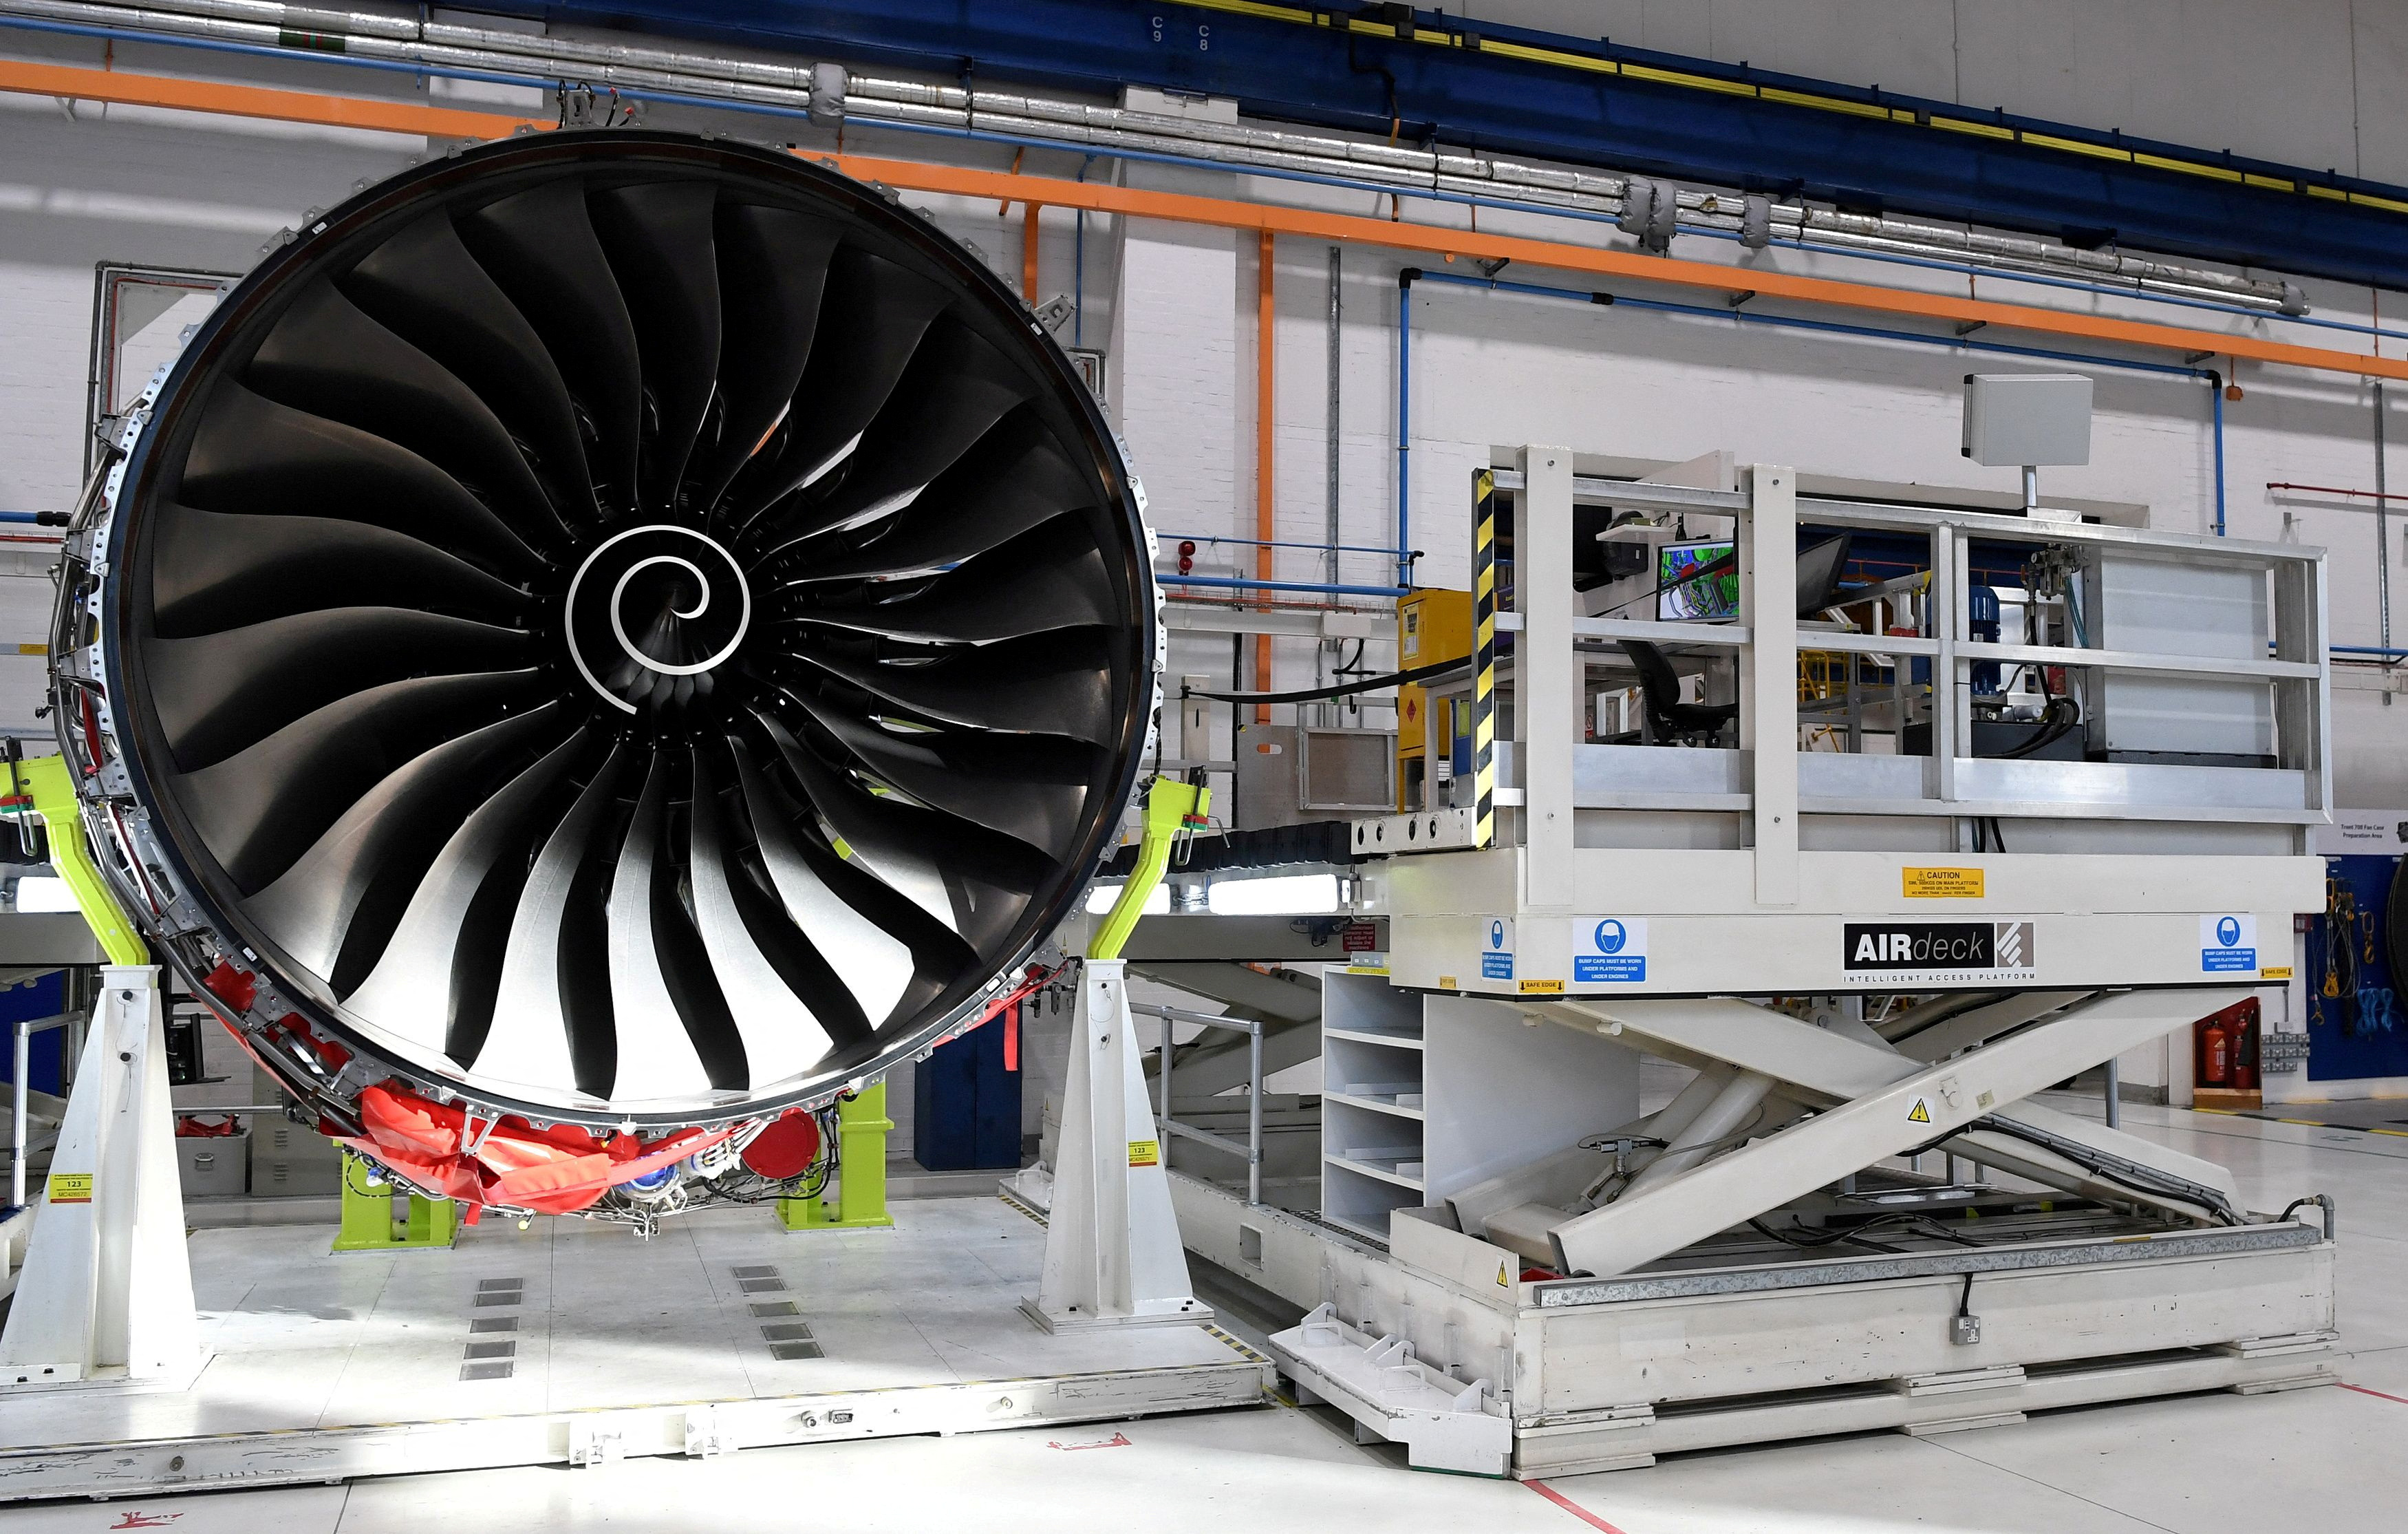 Rolls Royce Trent XWB aircraft engines at a factory in Derby, England